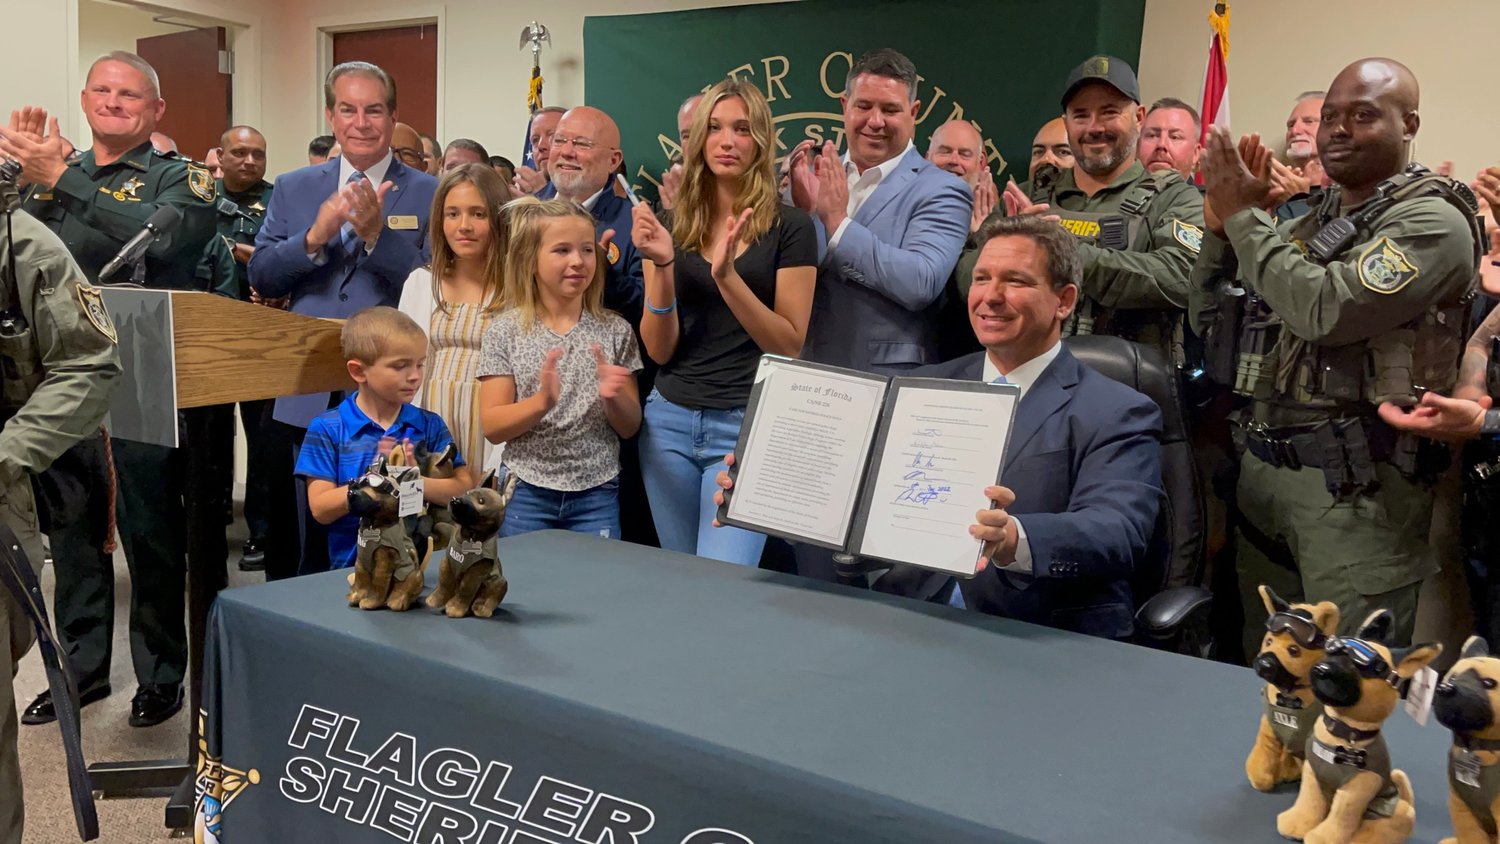 Emma Stanford, in black, stands next to State Senator Travis Hutson and Governor Ron DeSantis after the signing of the Care for Retired Police Dogs Program.